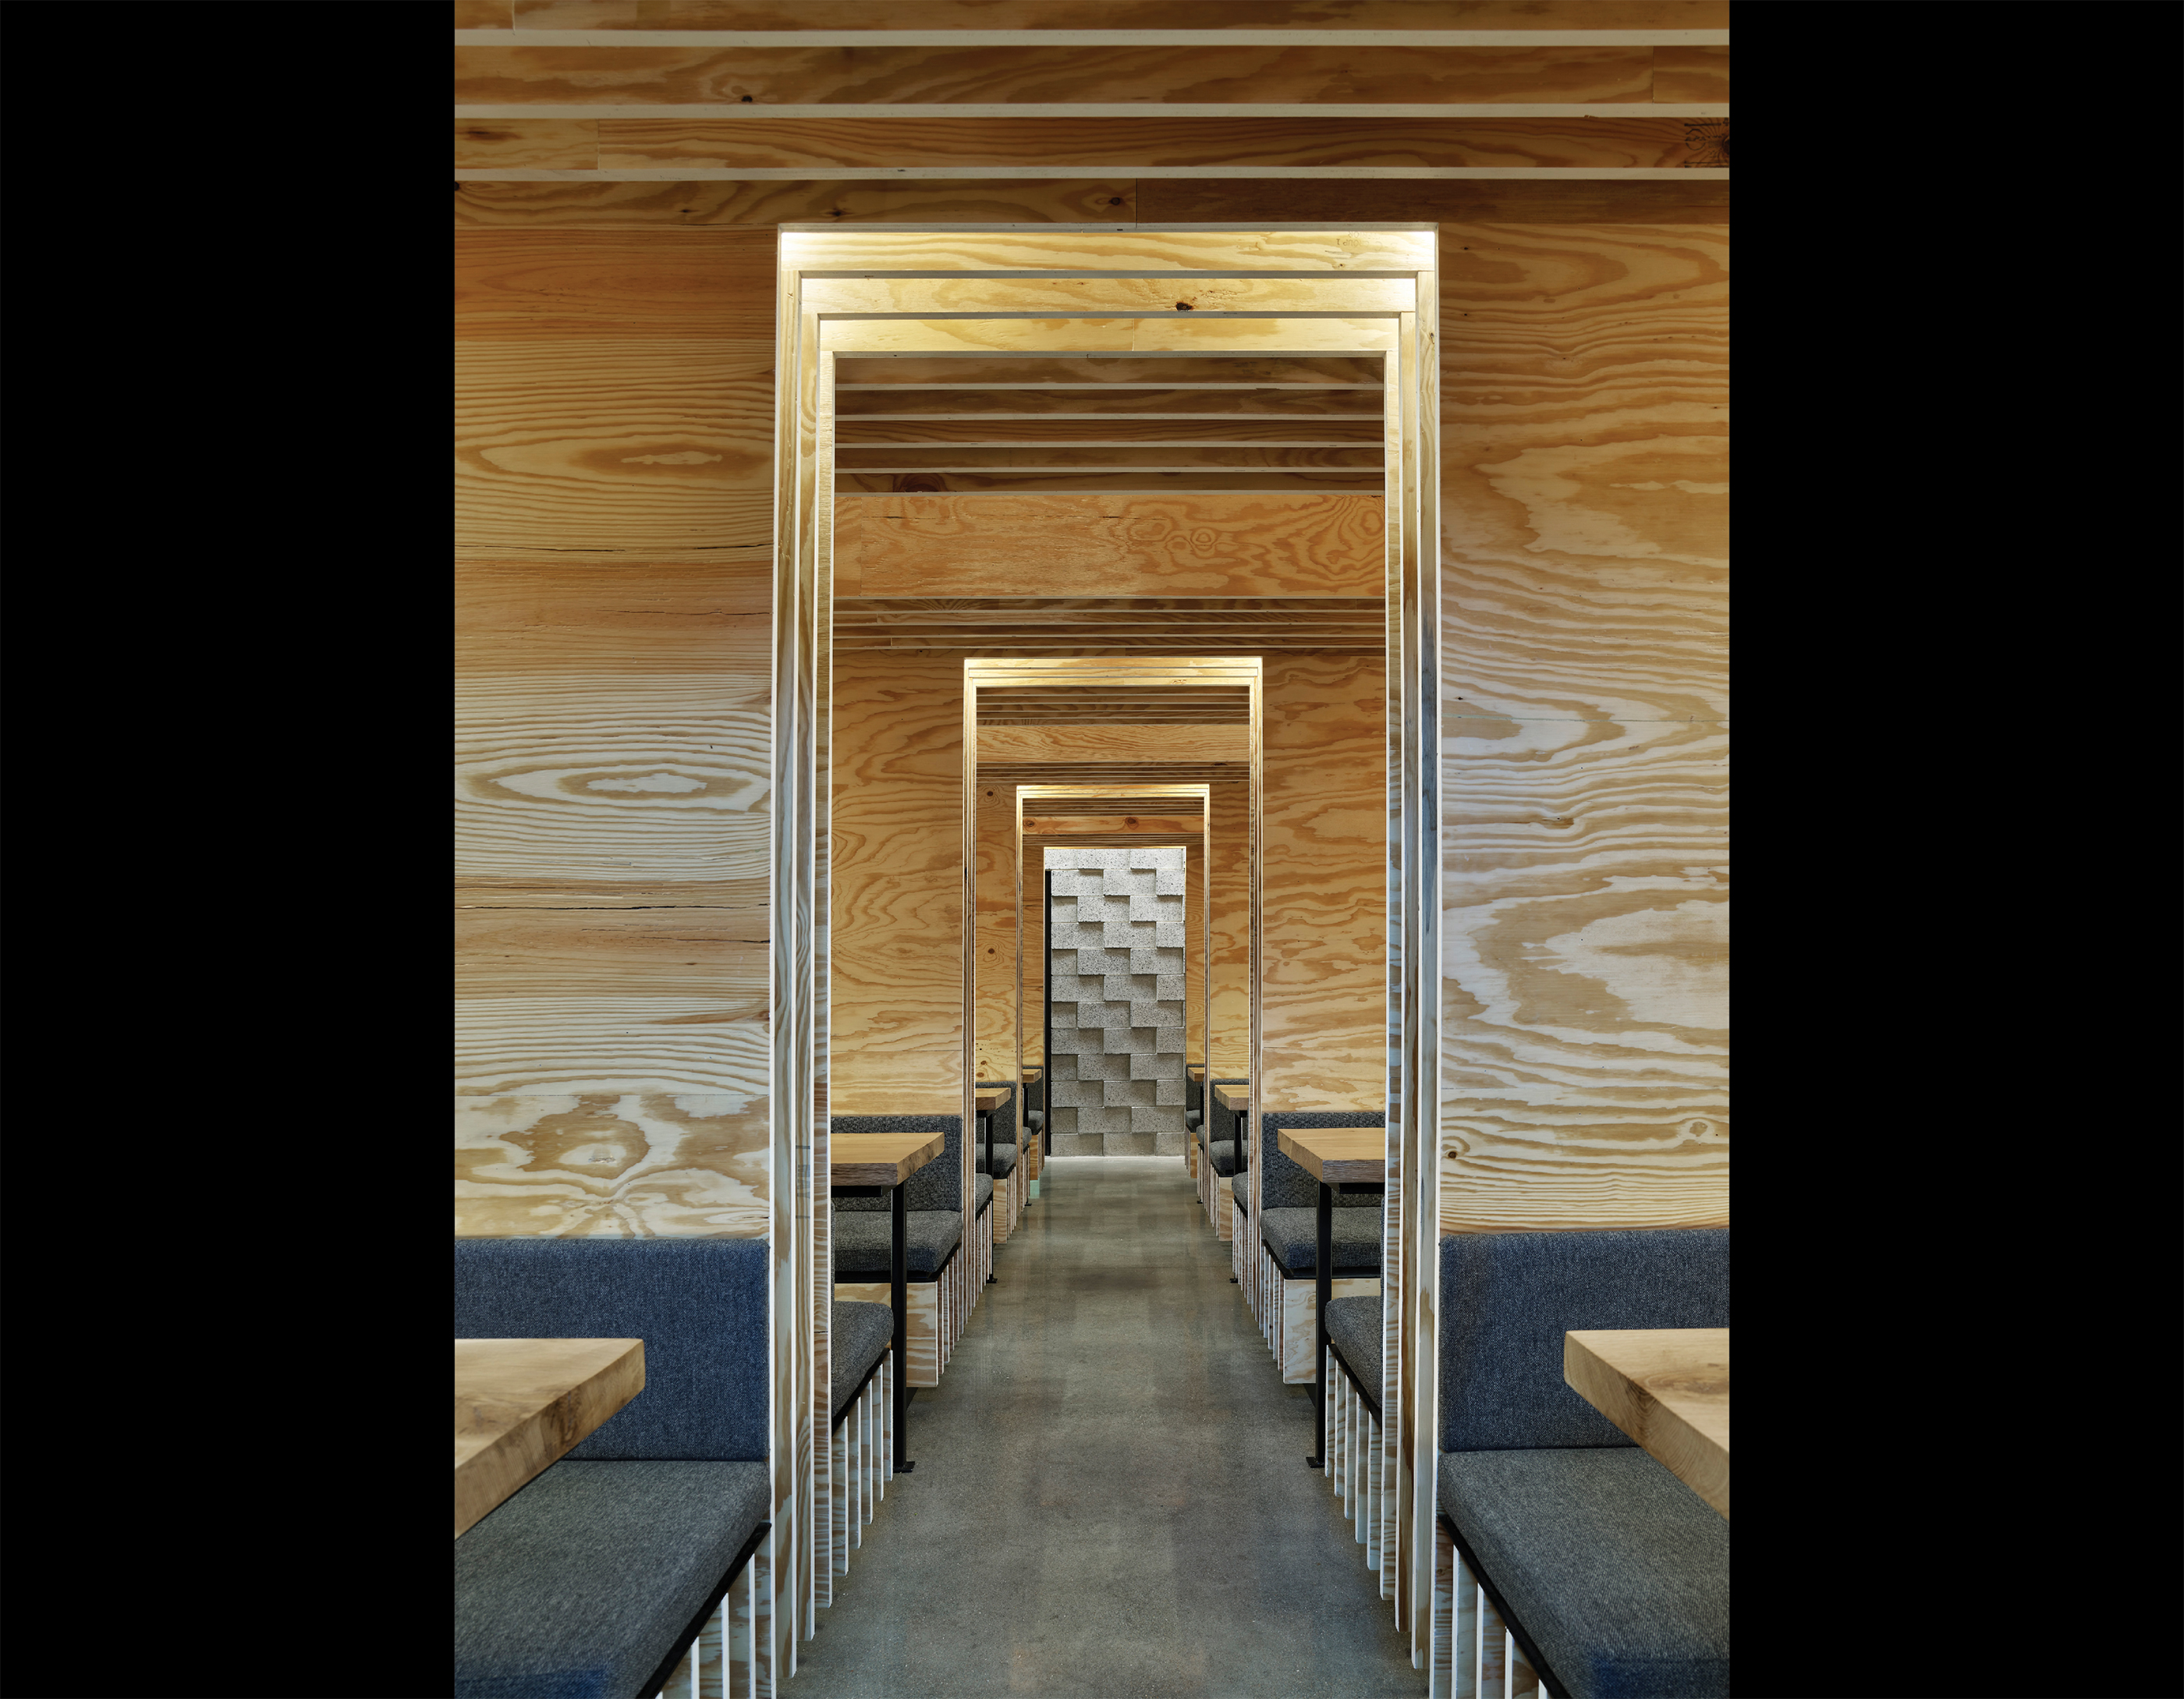 Interior of a ramen restaurant decked out in plywood